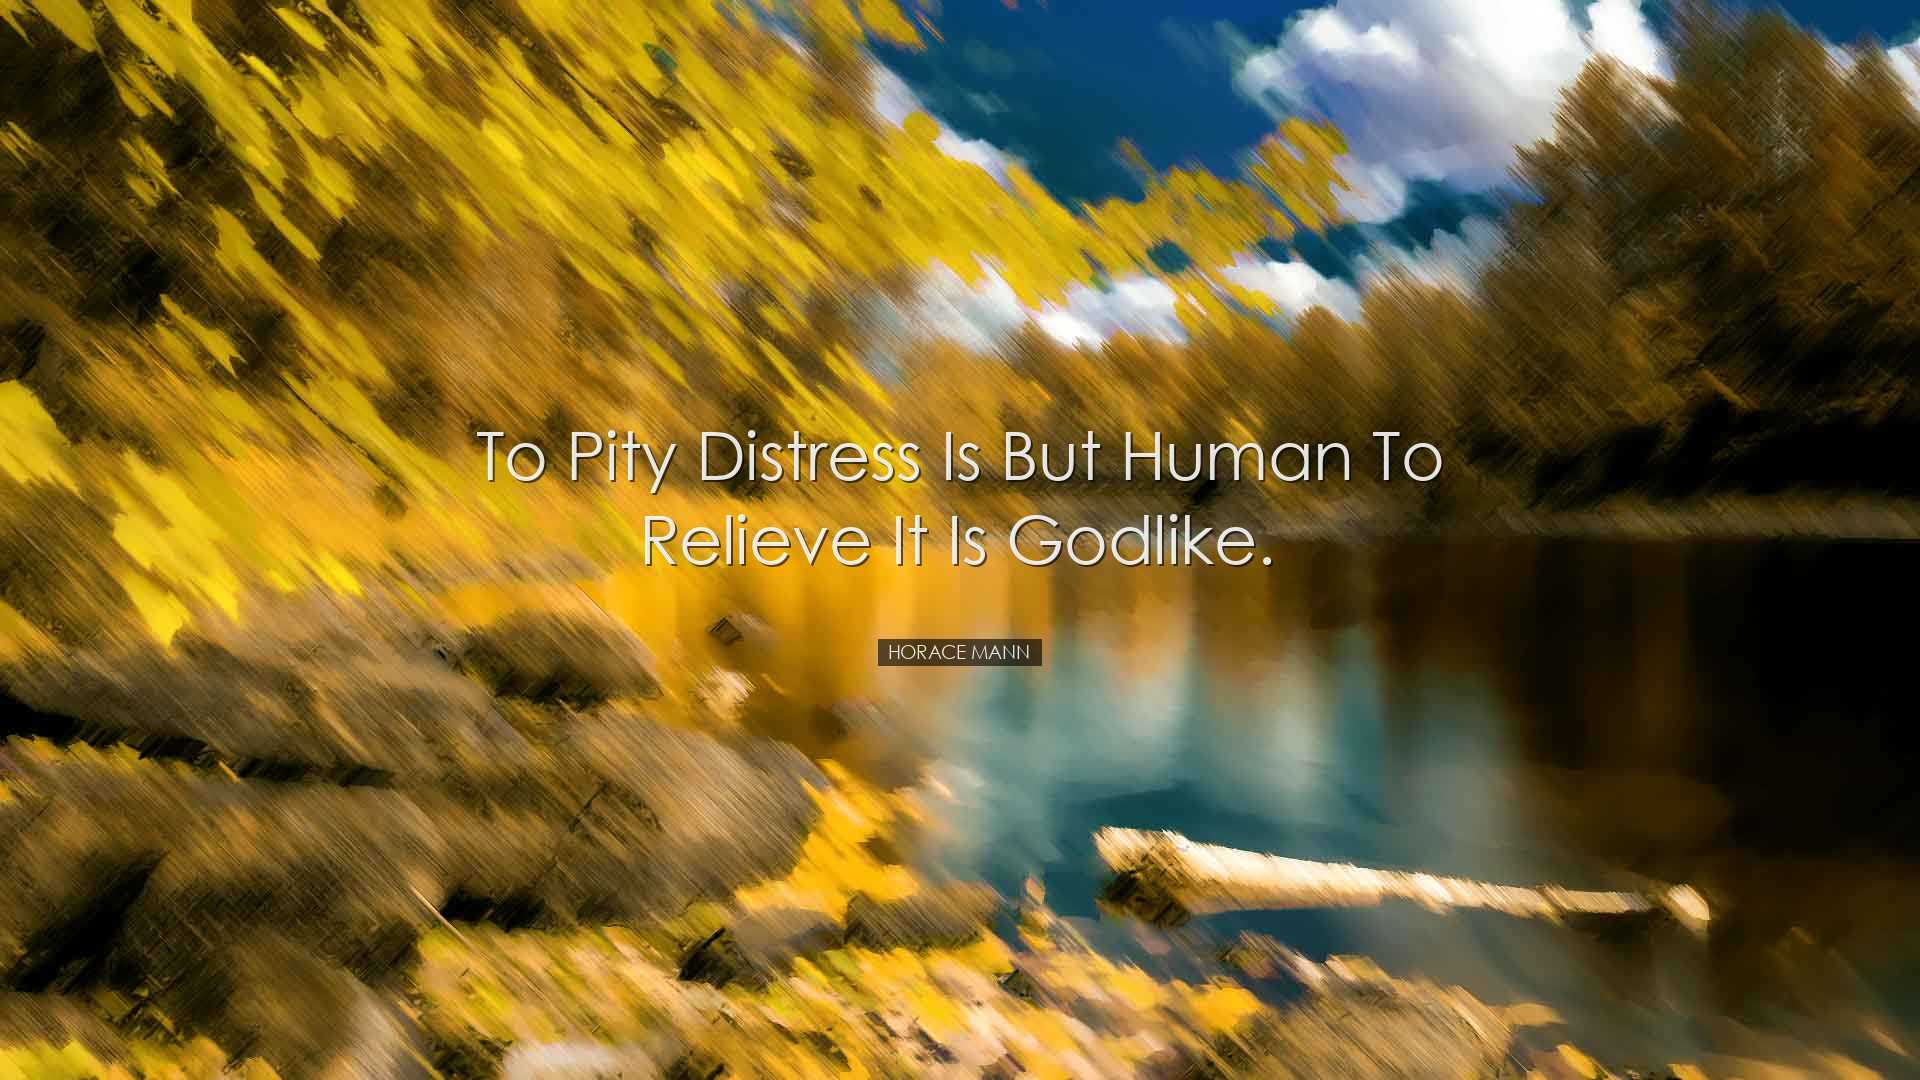 To pity distress is but human to relieve it is Godlike. - Horace M